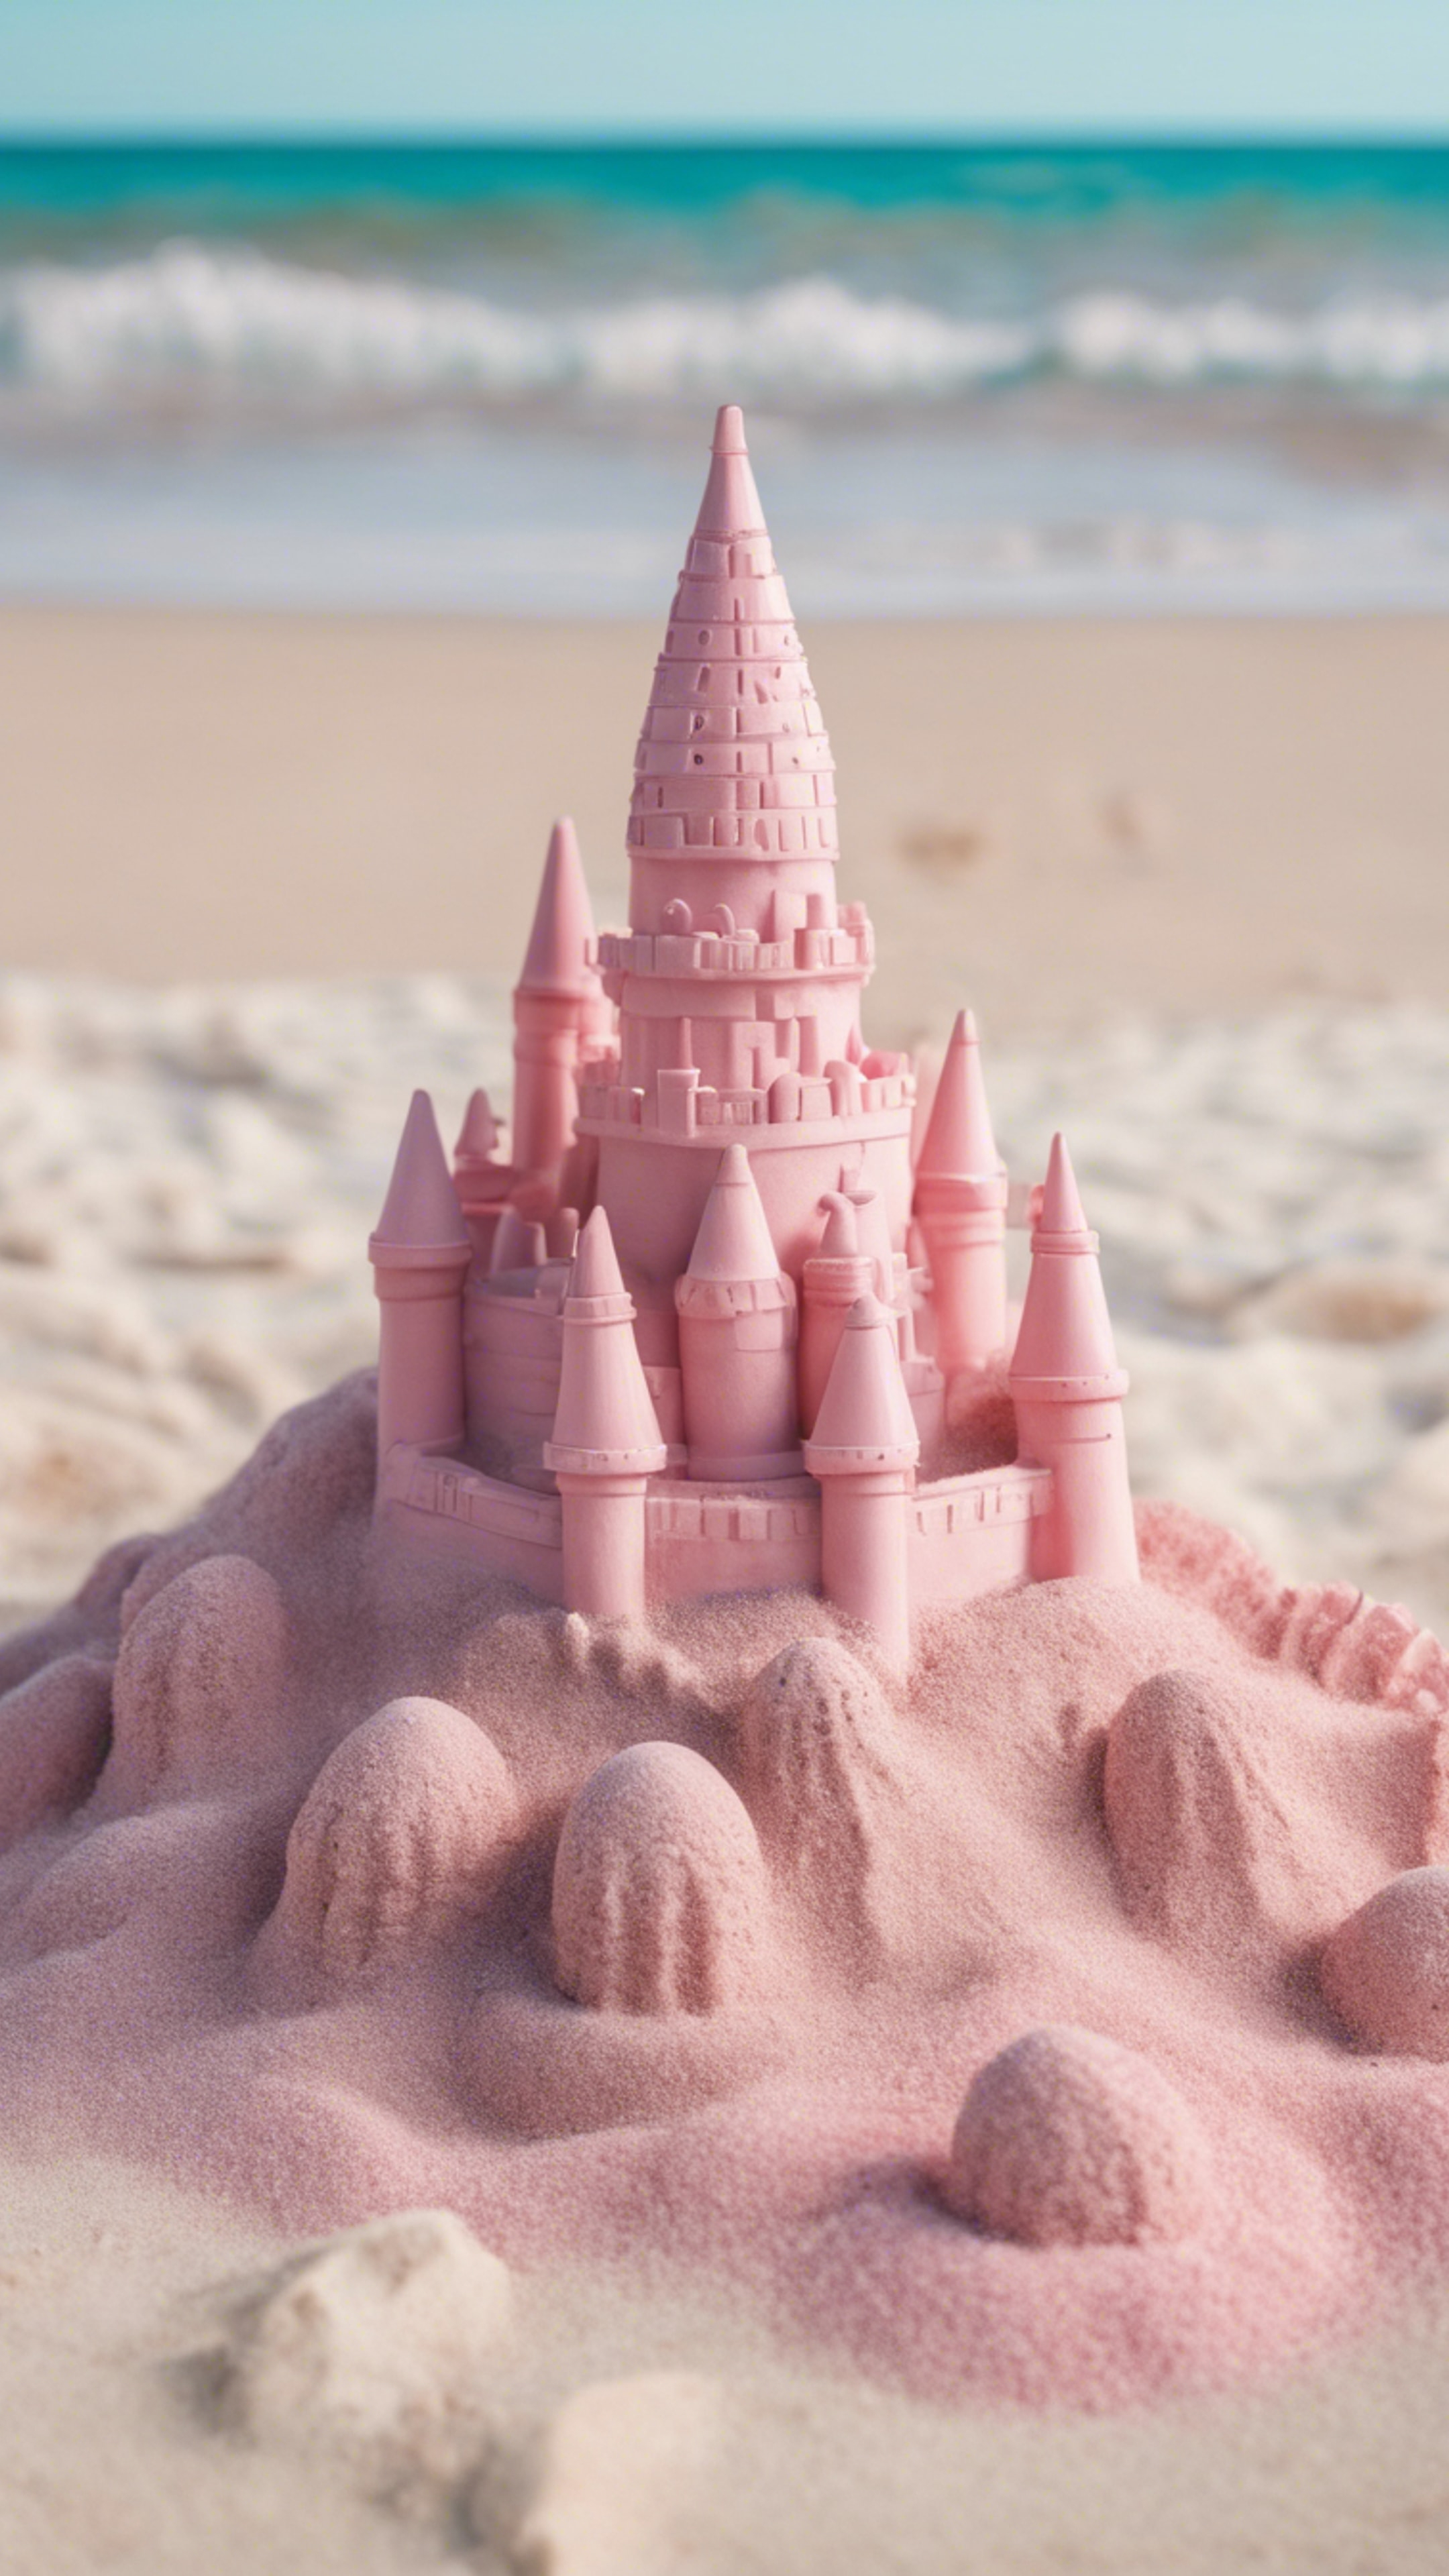 An intricate preppy pastel pink sandcastle on an idyllic beach with clear azure waters. ورق الجدران[55e256d408524d5fa872]